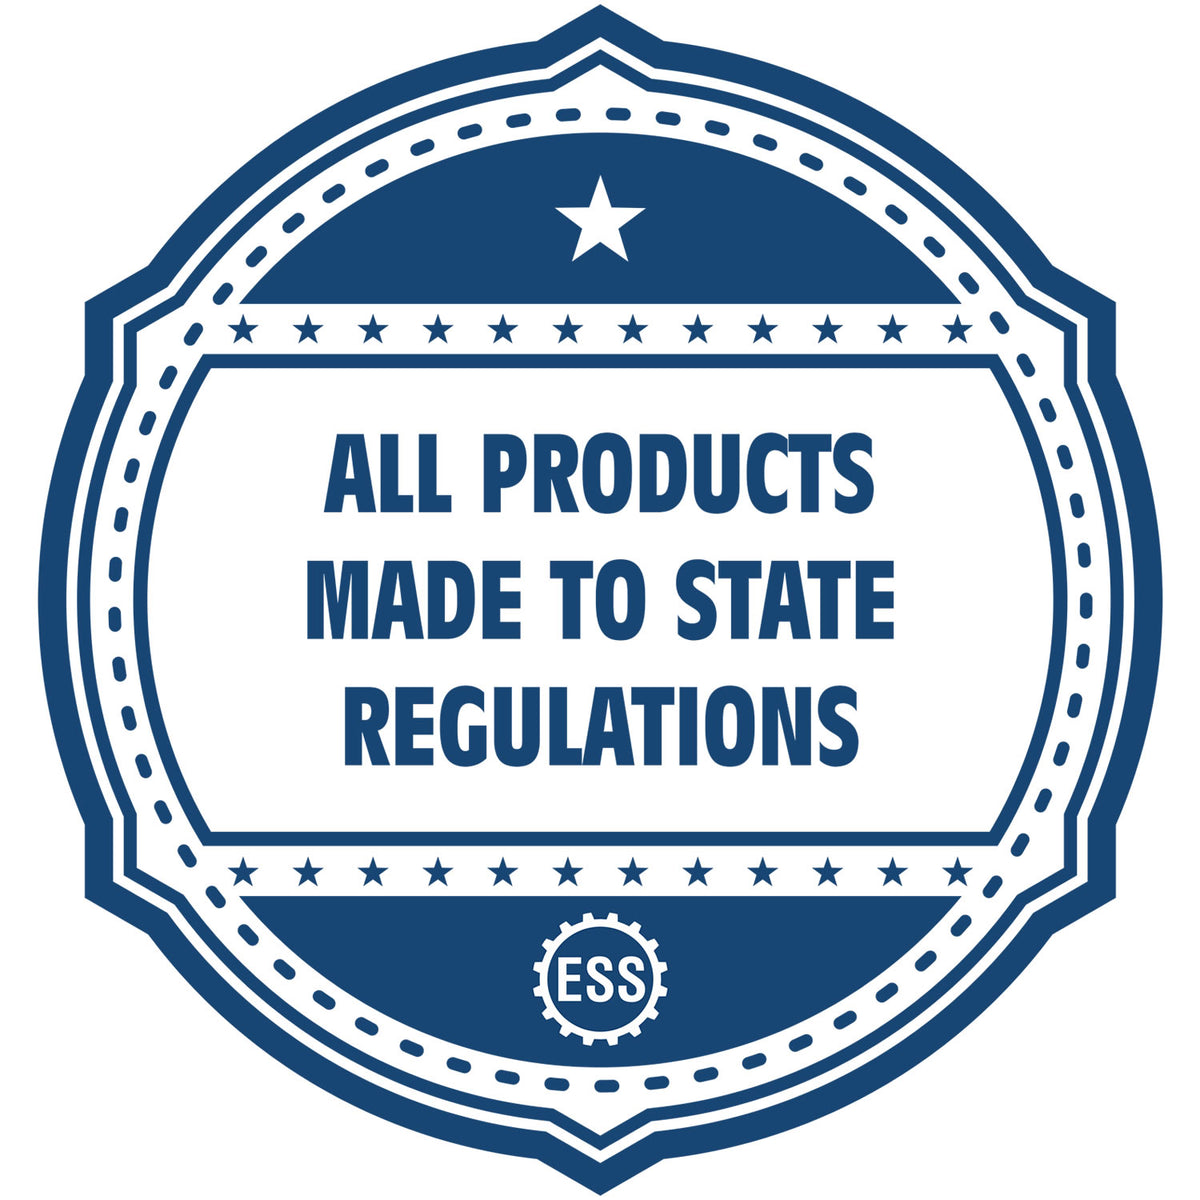 An icon or badge element for the Slim Pre-Inked Minnesota Land Surveyor Seal Stamp showing that this product is made in compliance with state regulations.